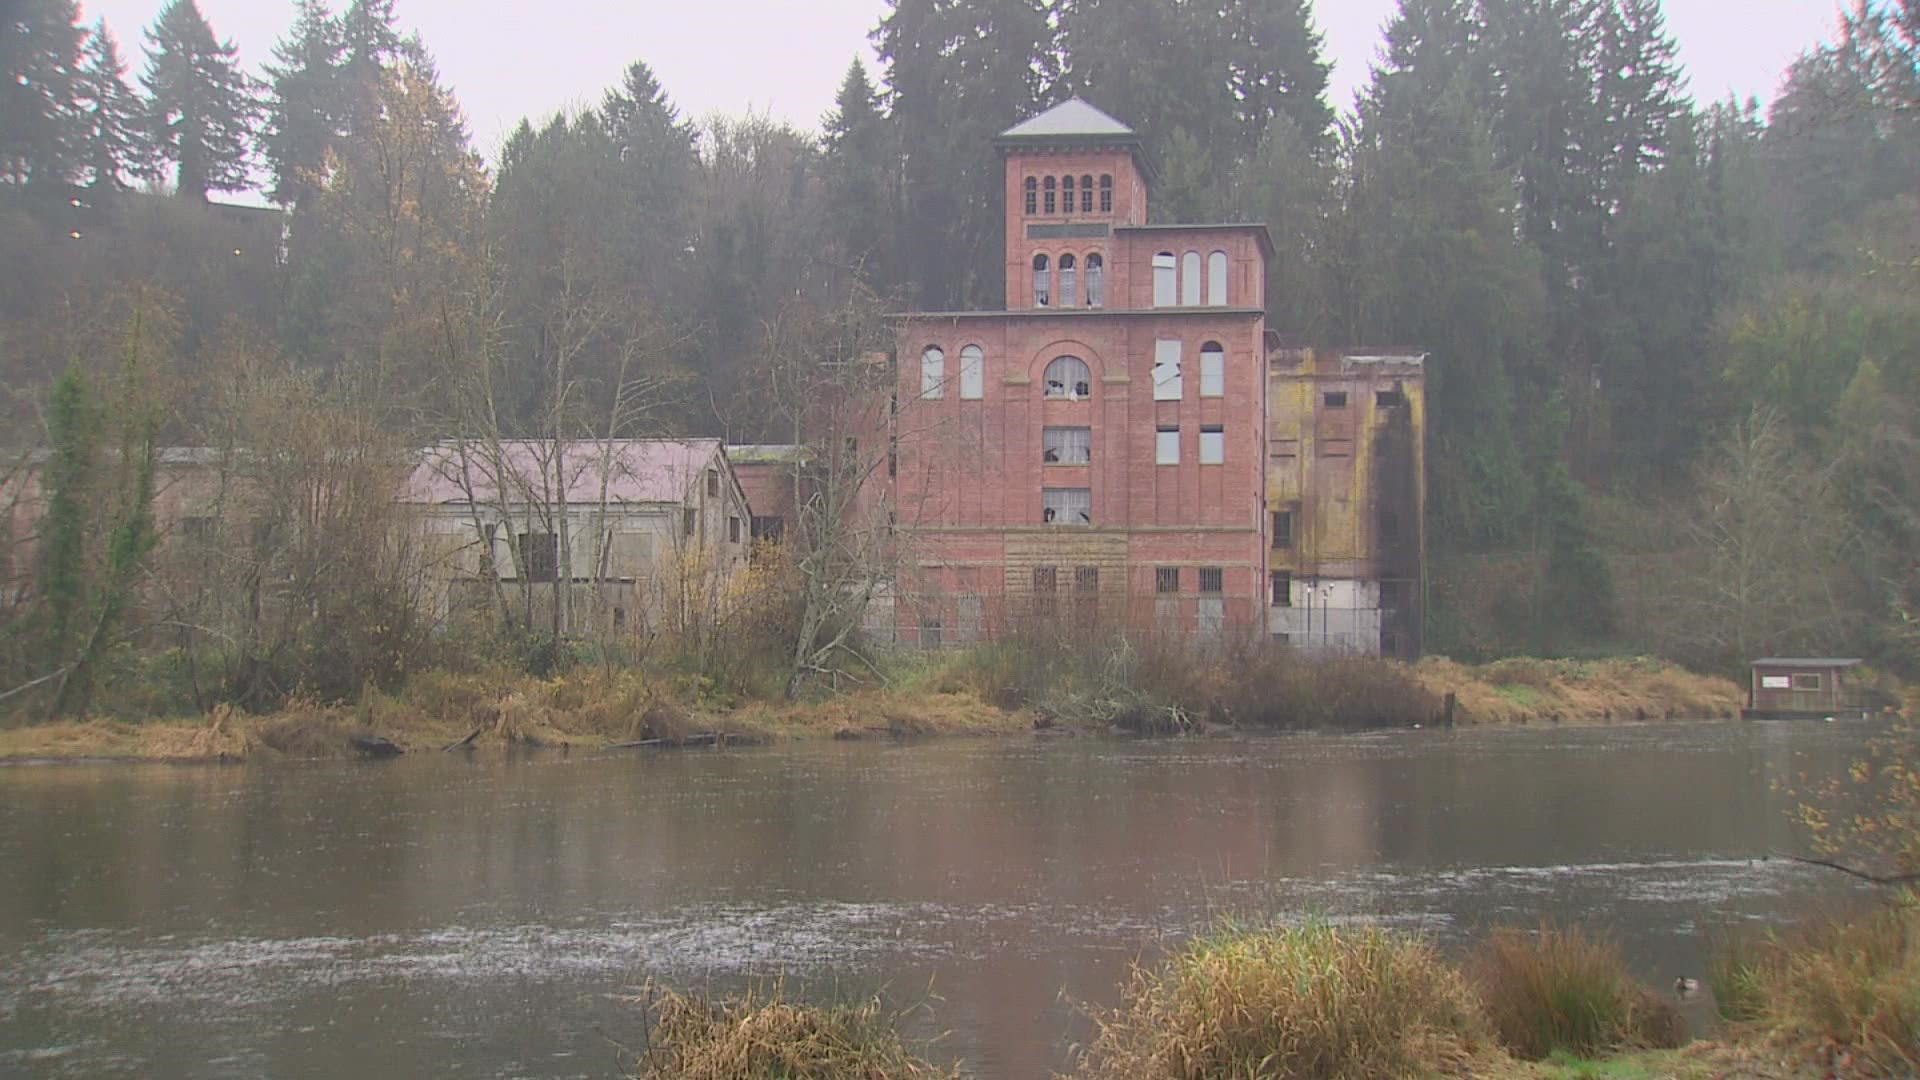 The City of Olympia hopes Gov. Inslee will back fundraising efforts to preserve the historic building.